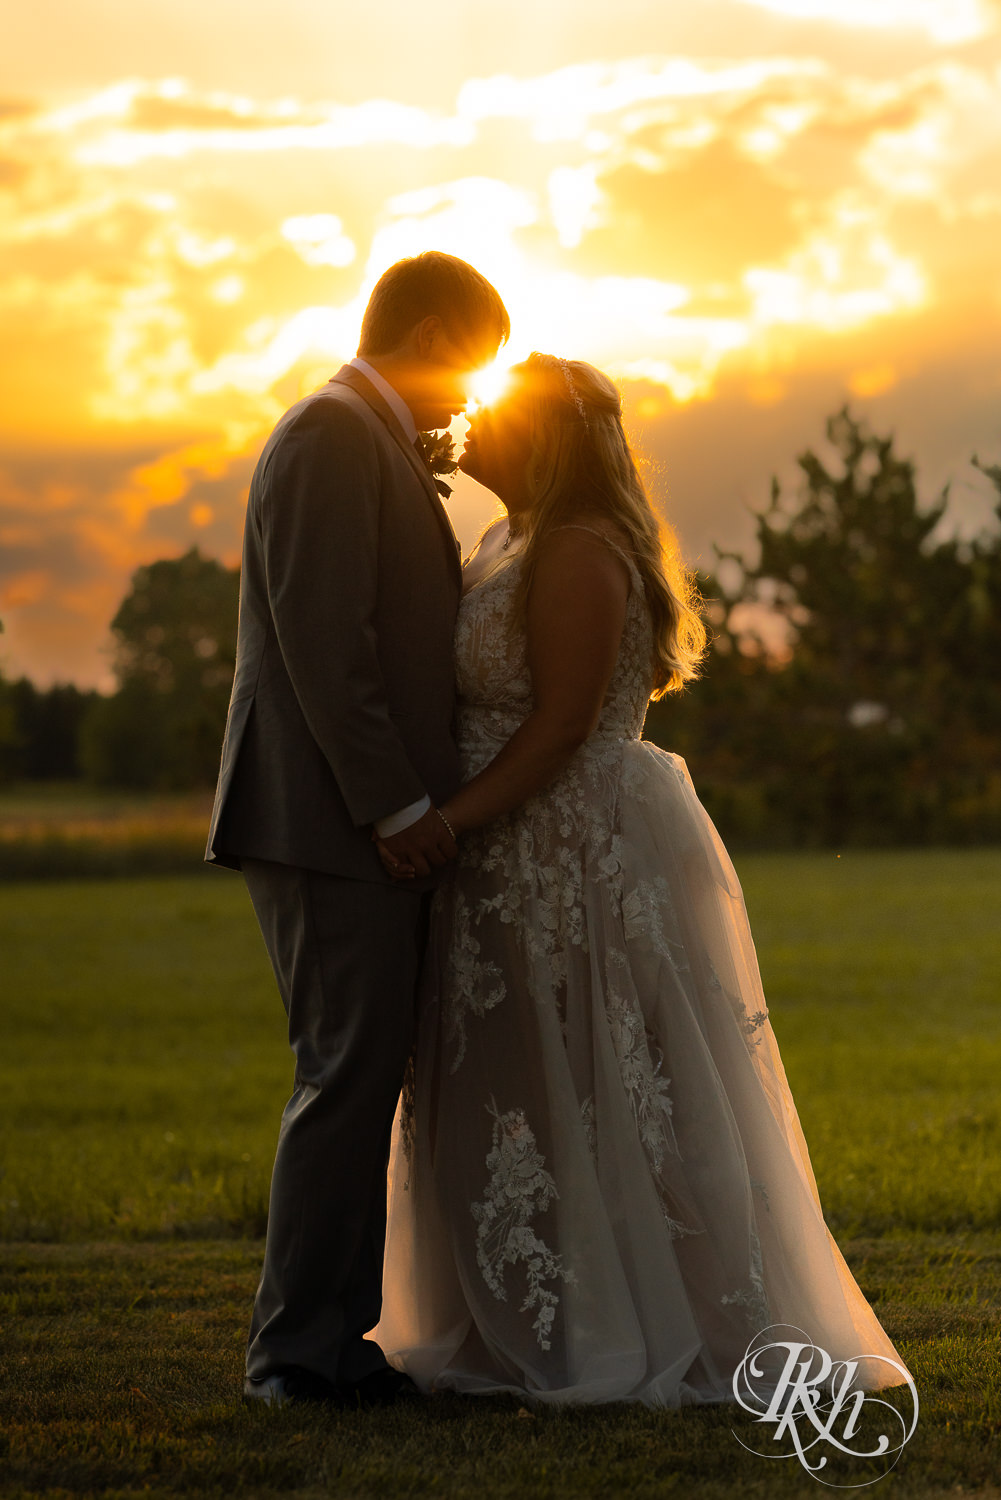 Bride and groom looking at each other at sunset